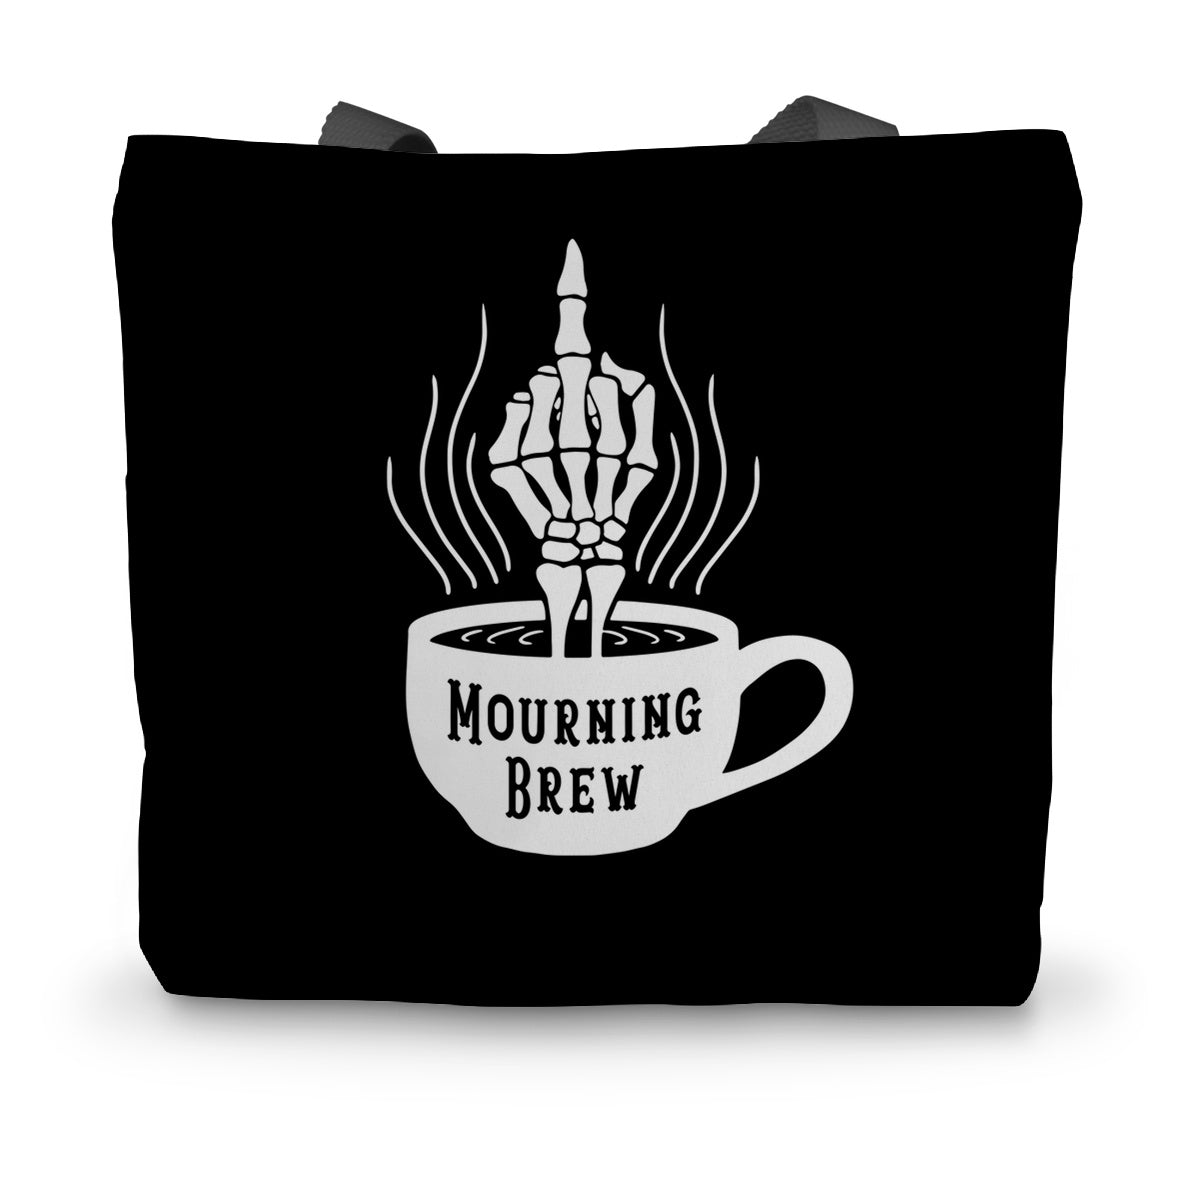 Mourning Brew Canvas Tote Bag - The Gothic Stationery Company - Homeware